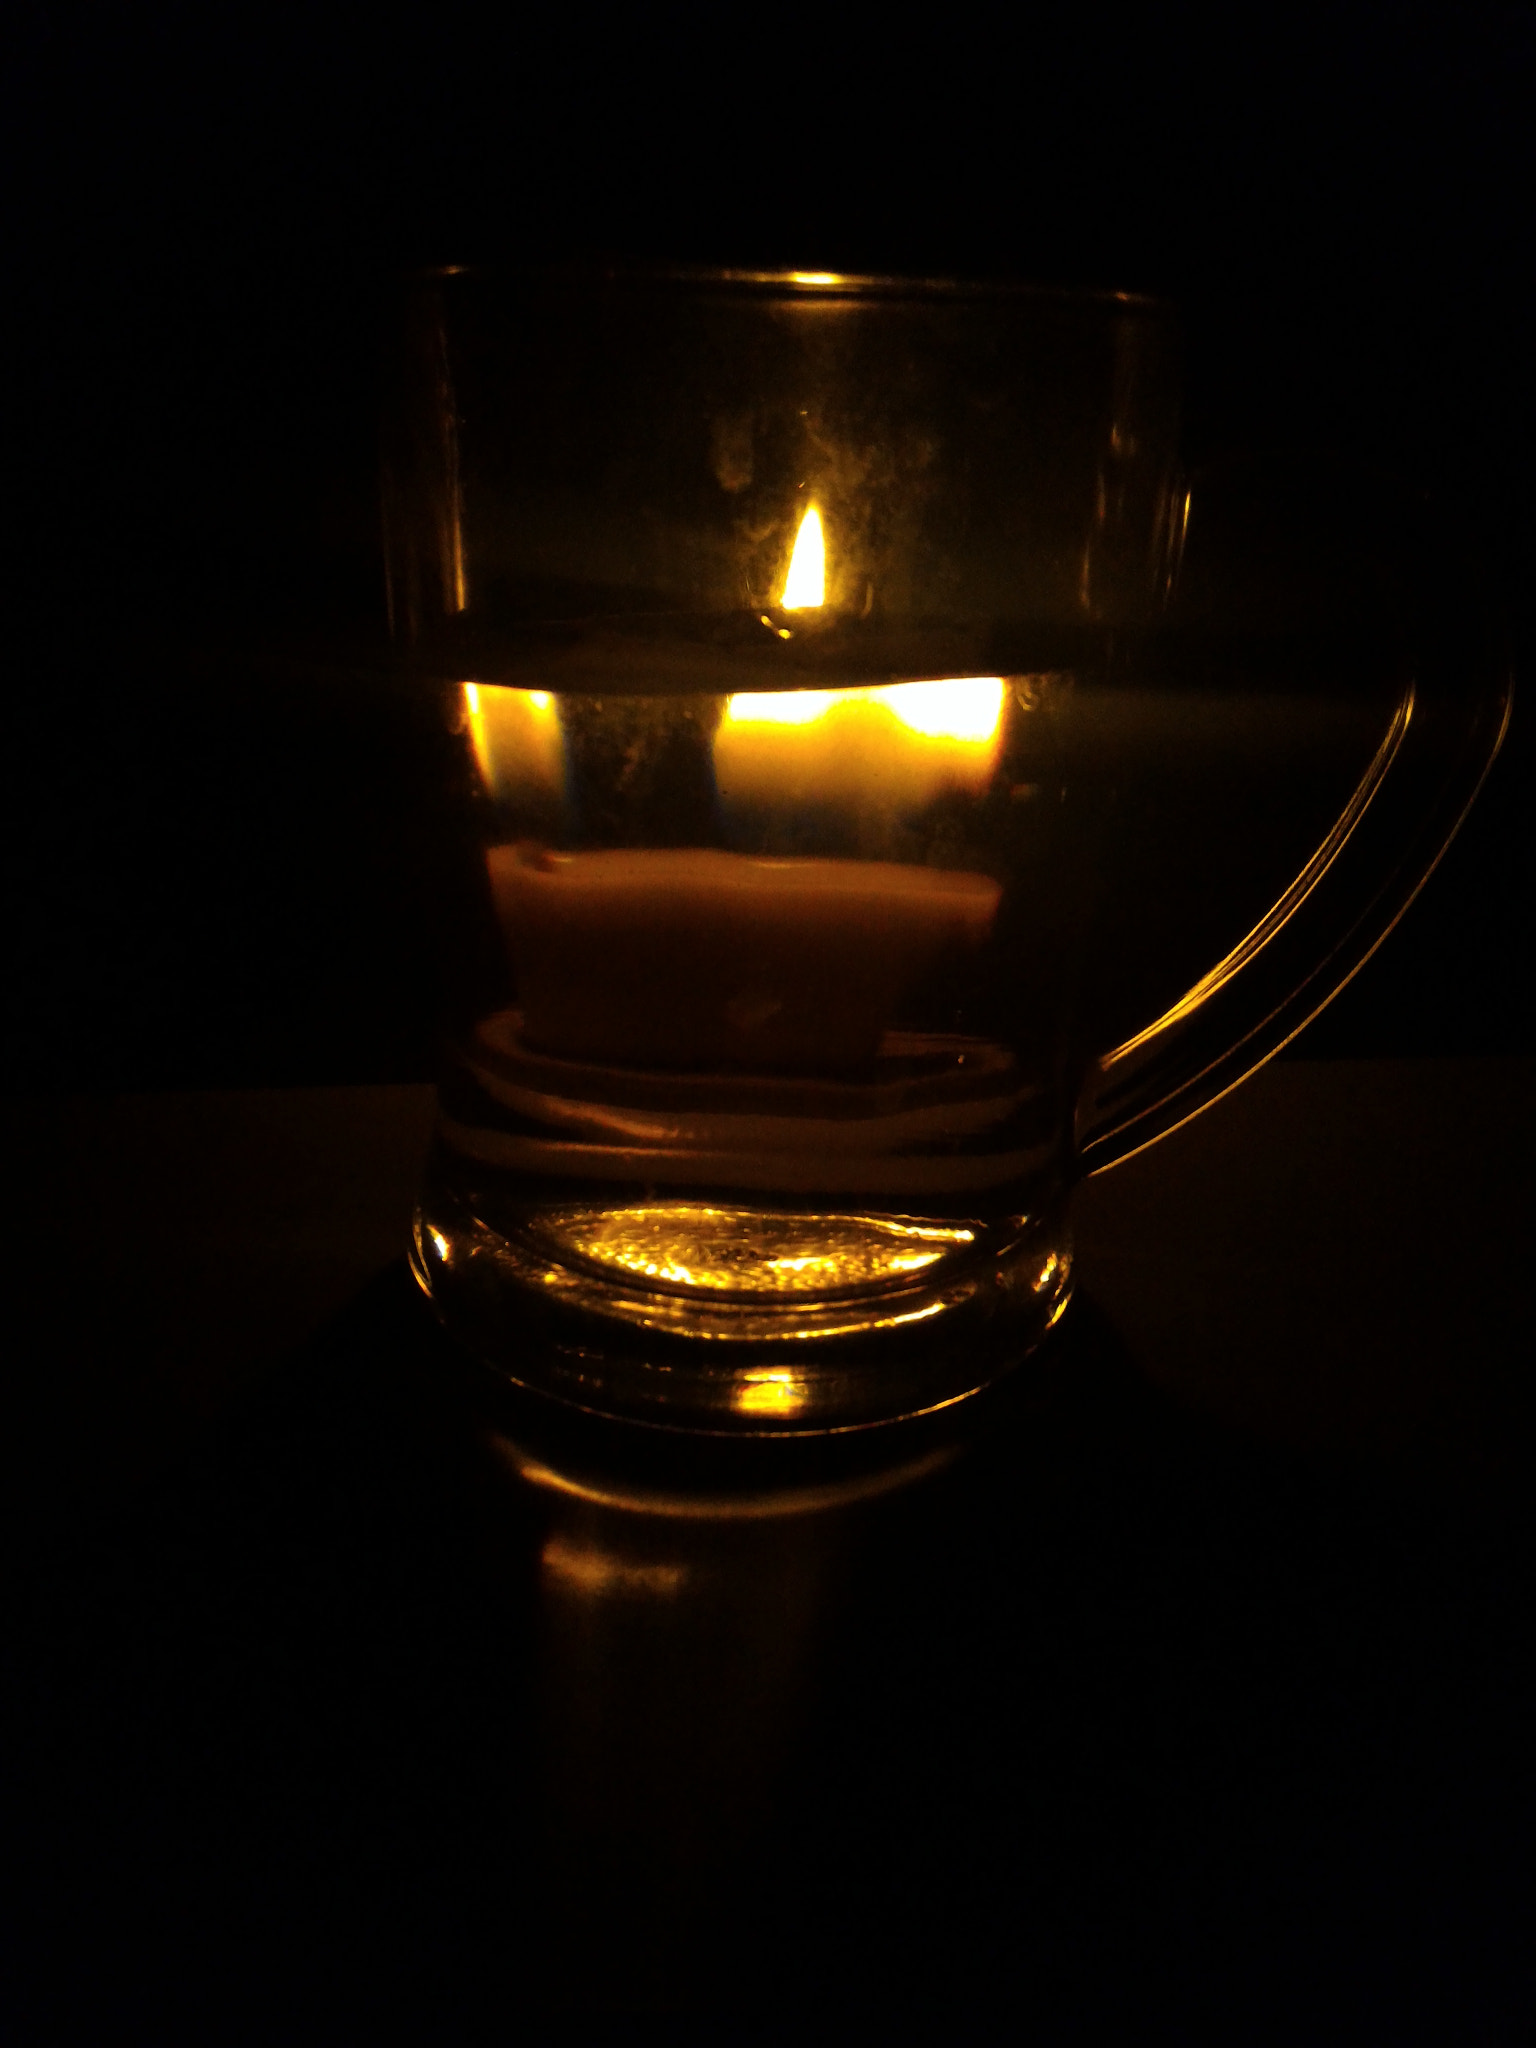 ASUS Z008D sample photo. Glass,water n candle photography